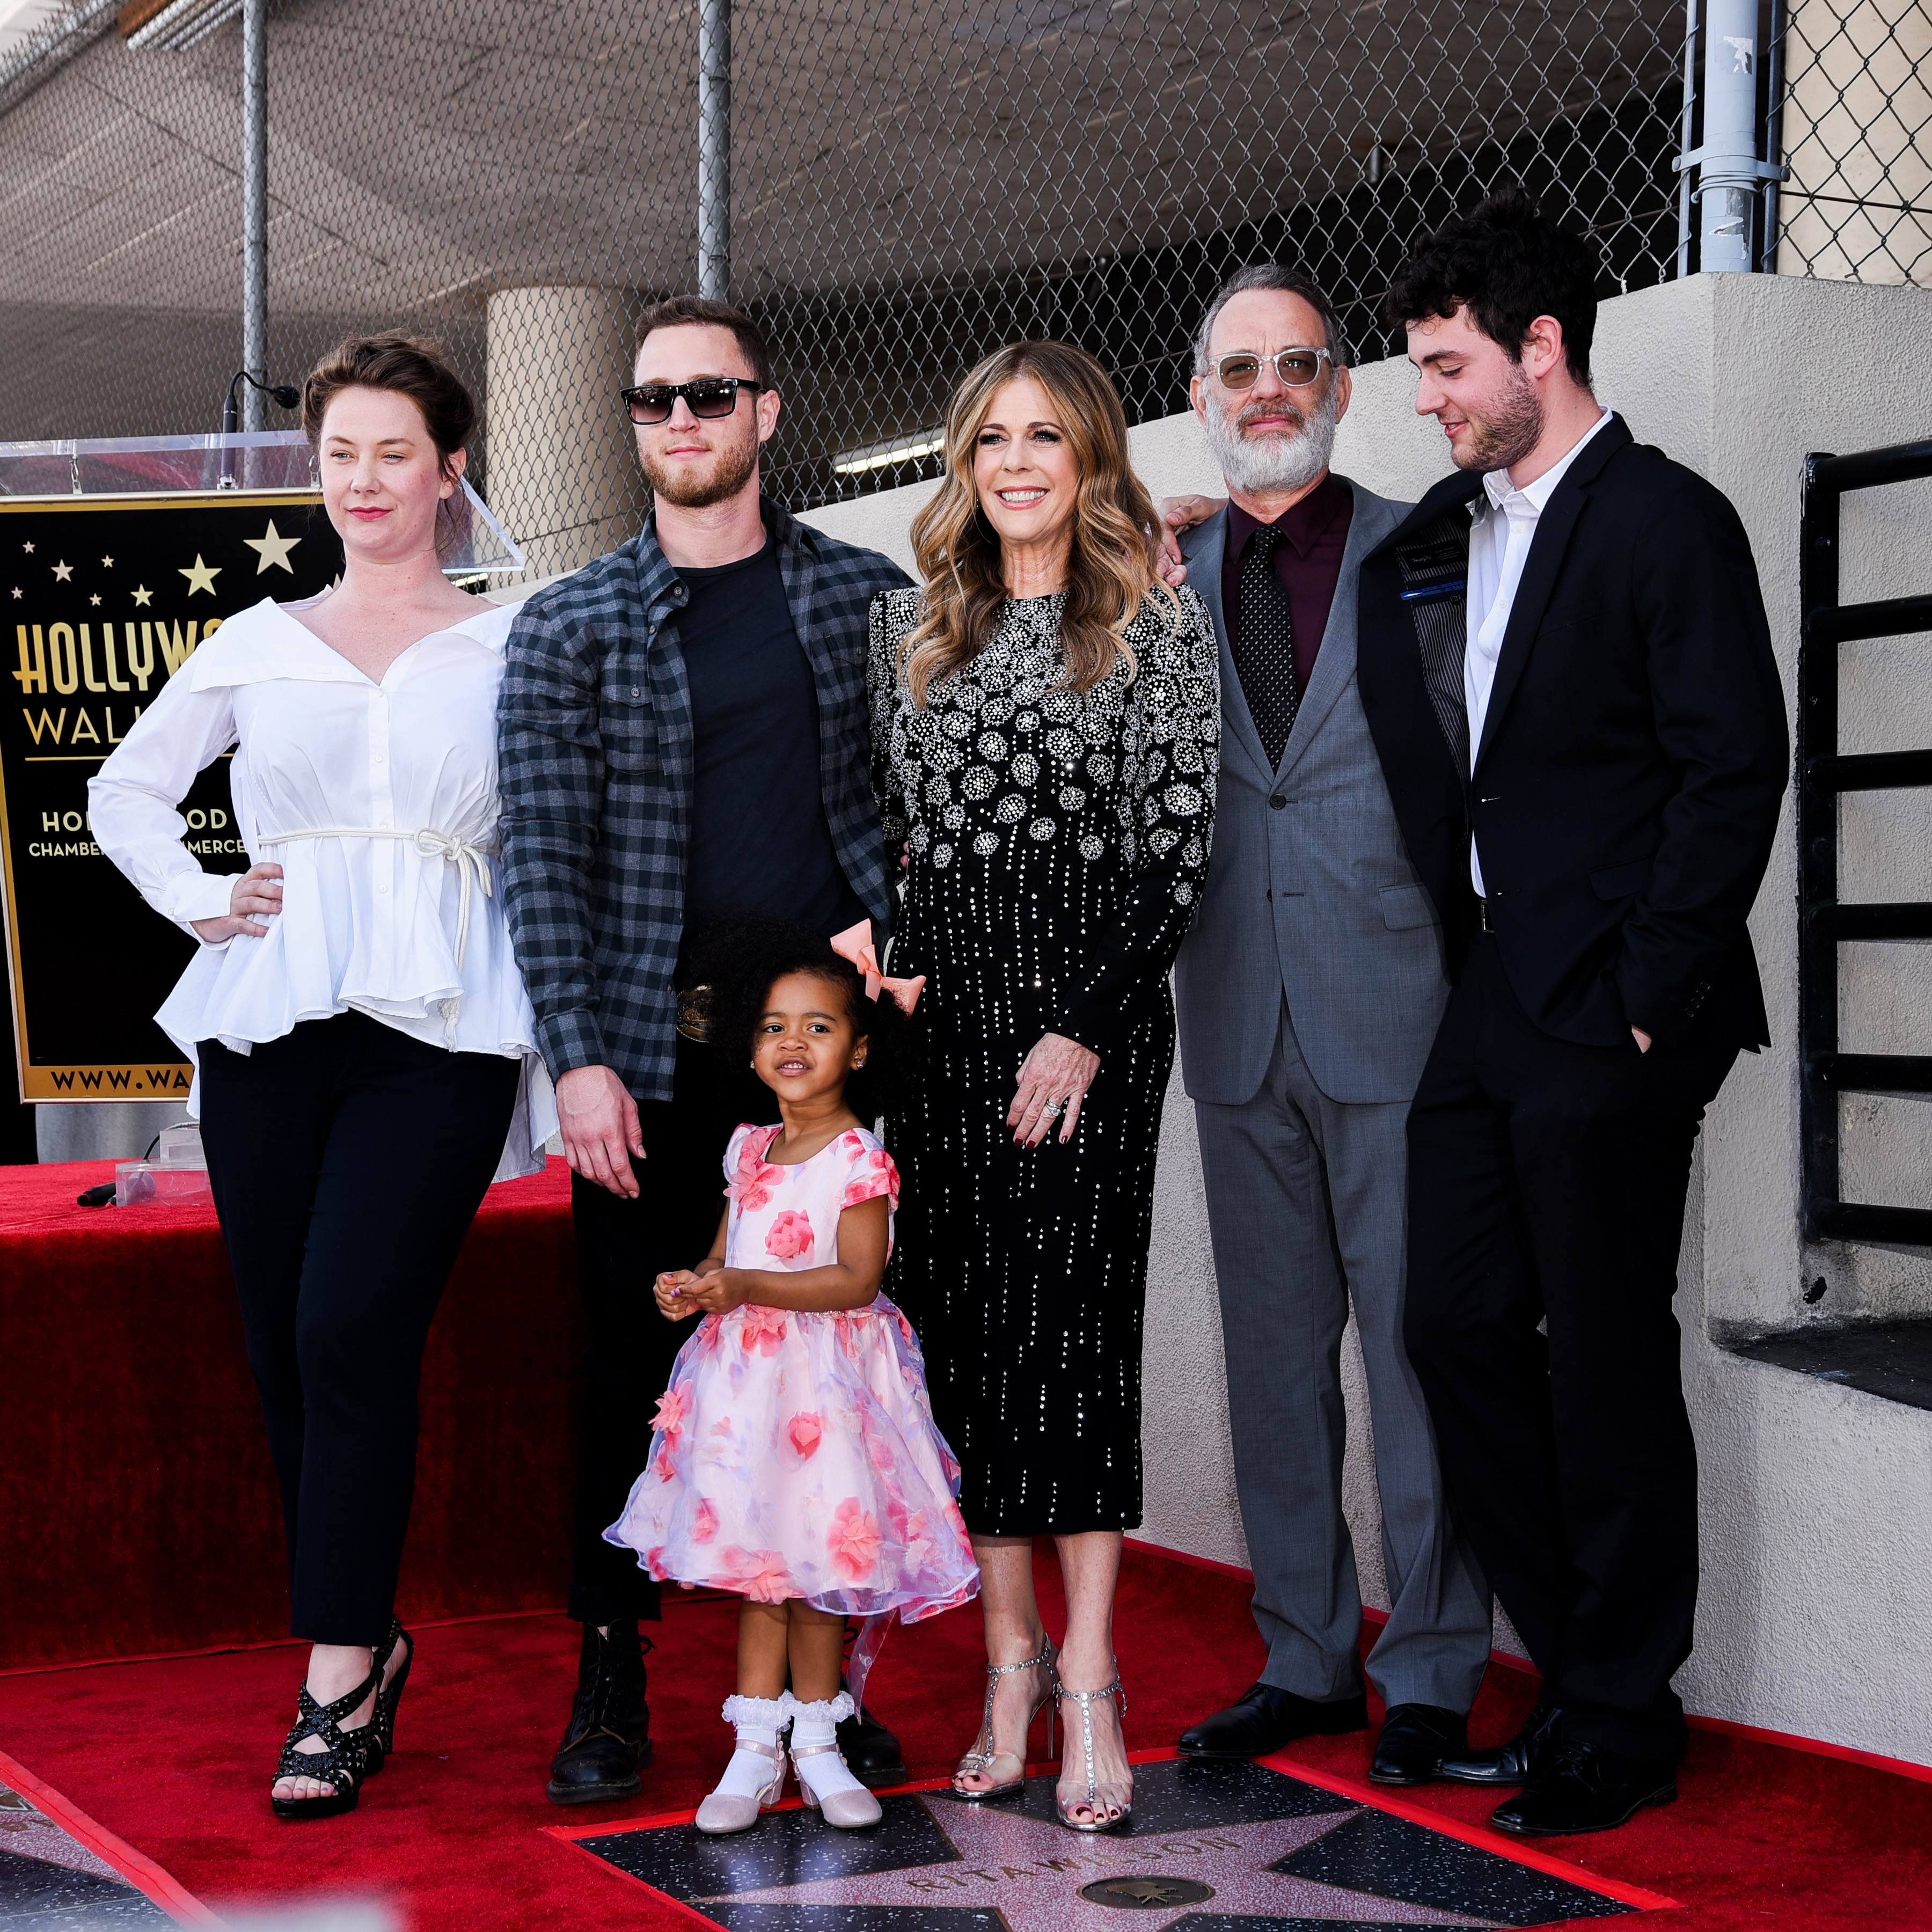 Rita Wilson, Tom Hanks and family members on March 29, 2019 in Hollywood, California | Source: Getty Images